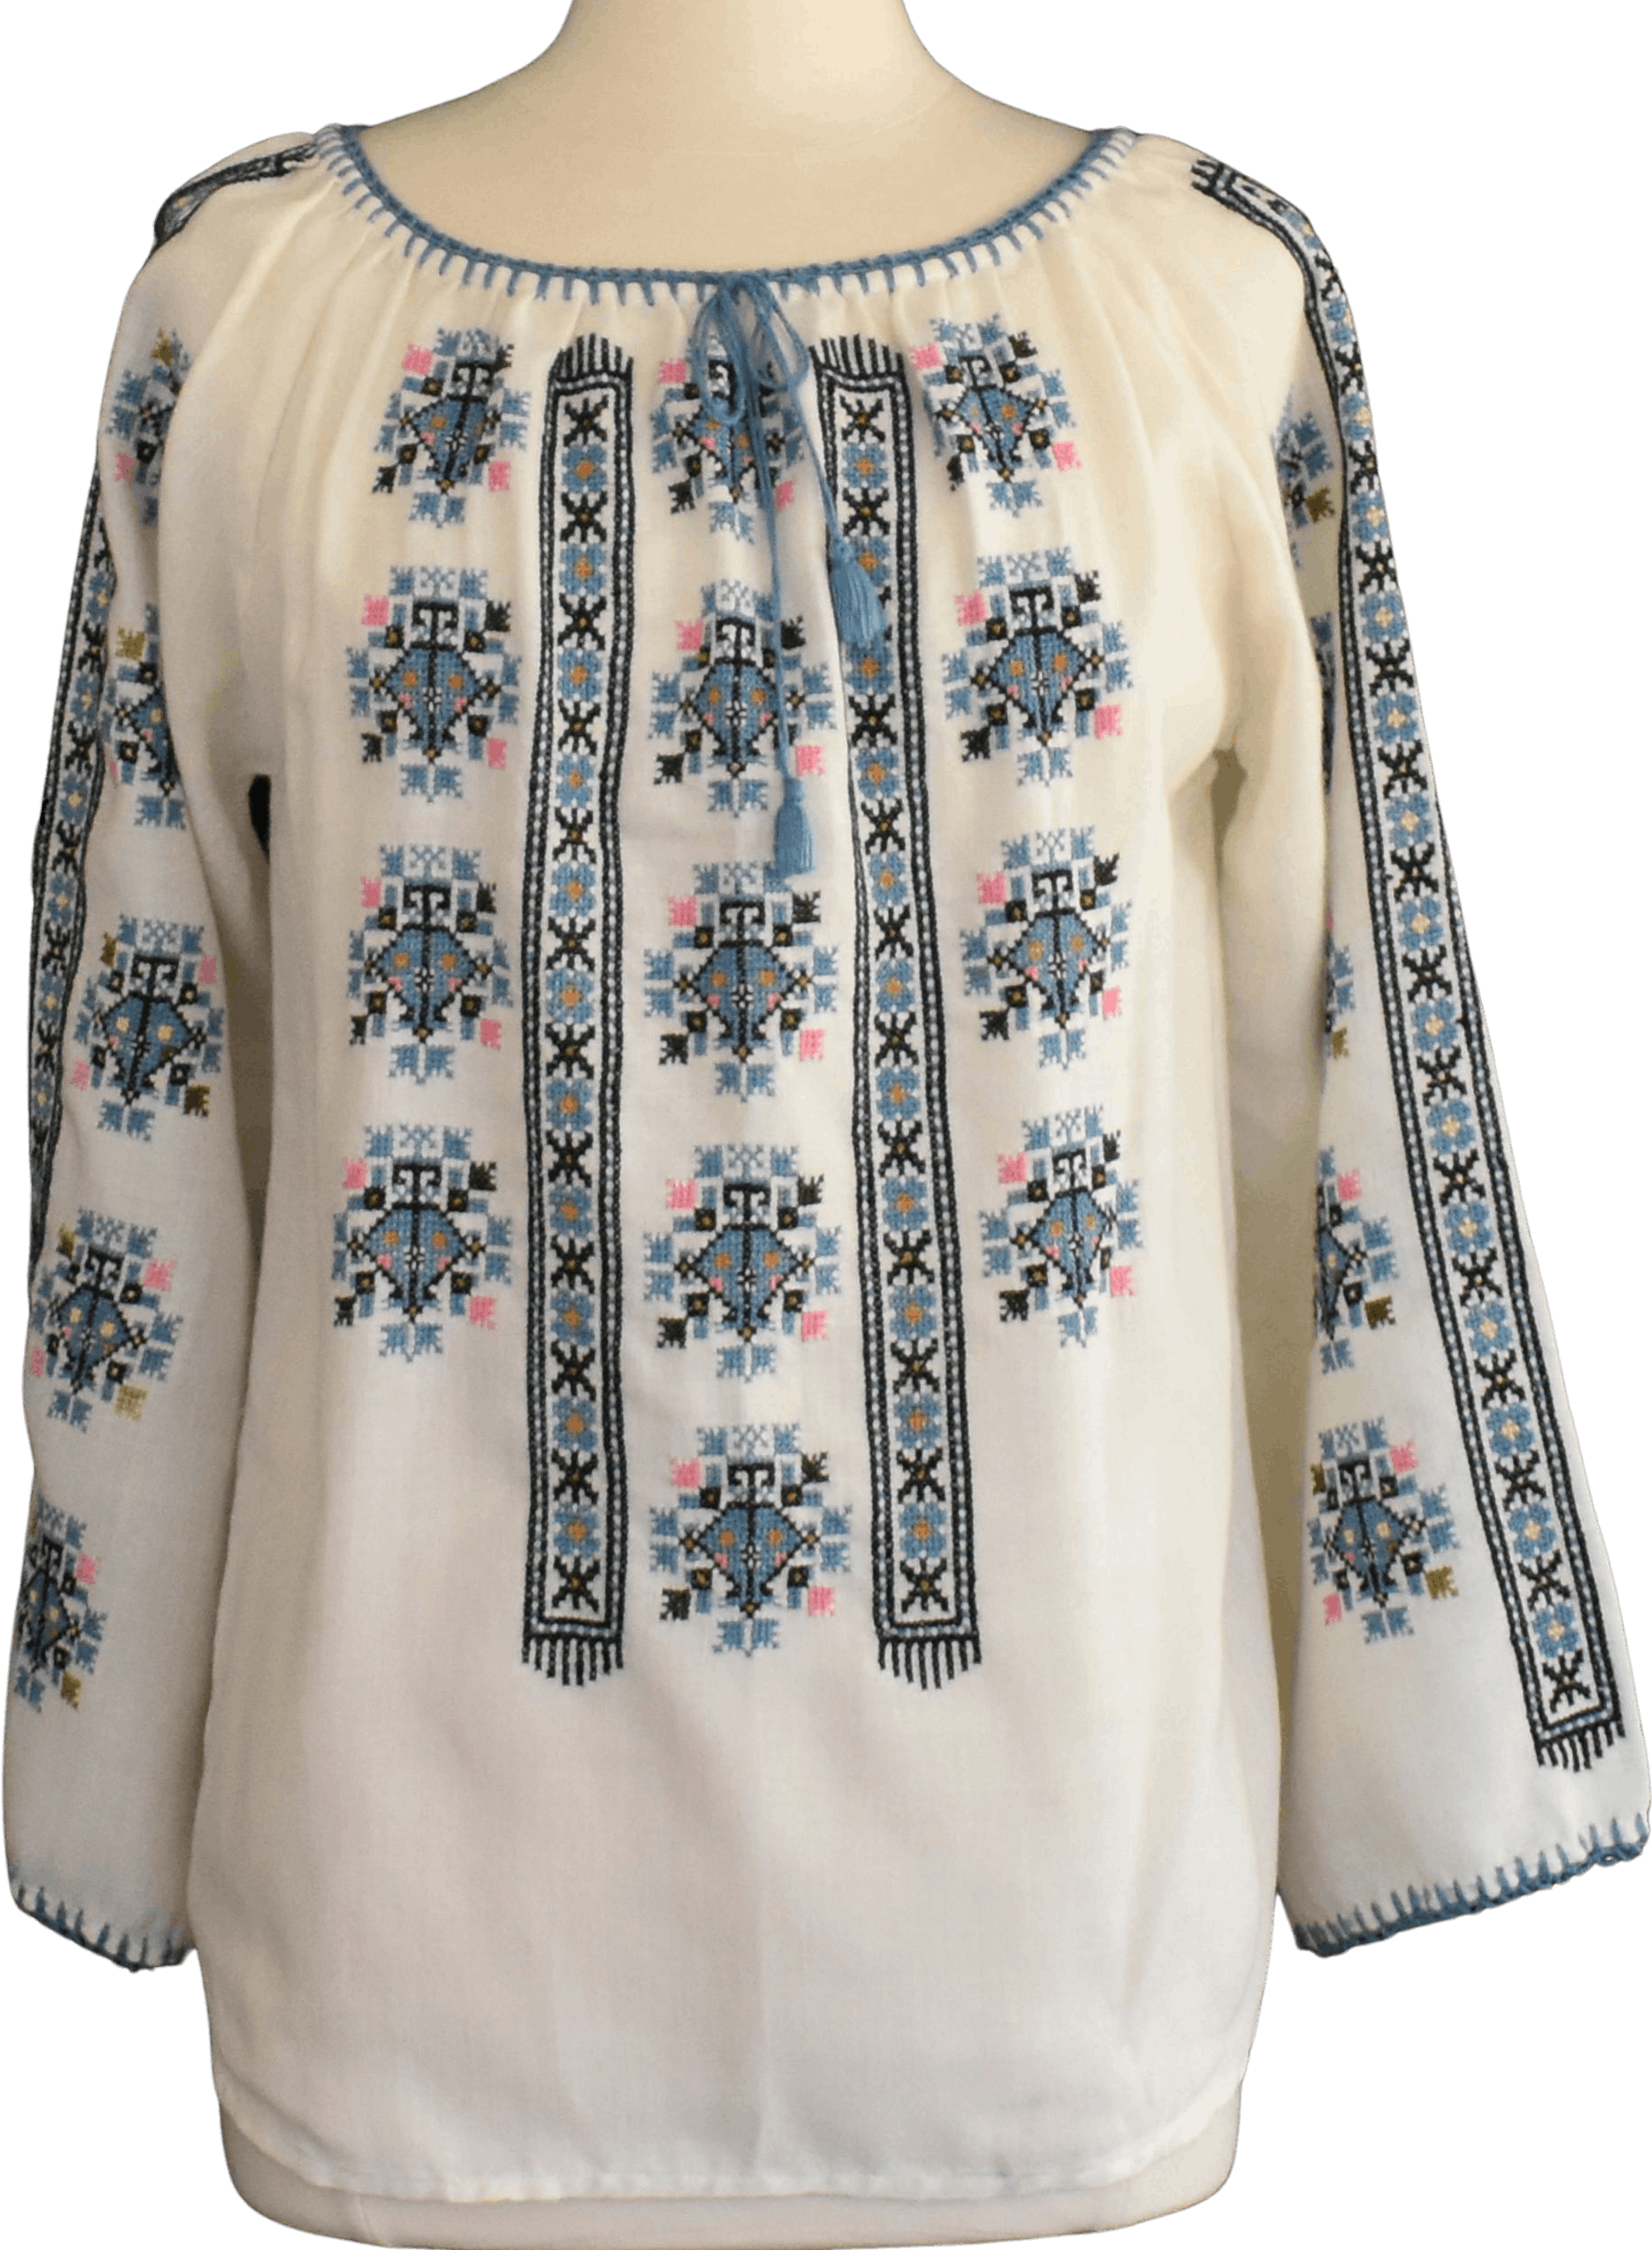 Vintage 70's Blue and White Hand Embroidered Blouse | Shop THRILLING